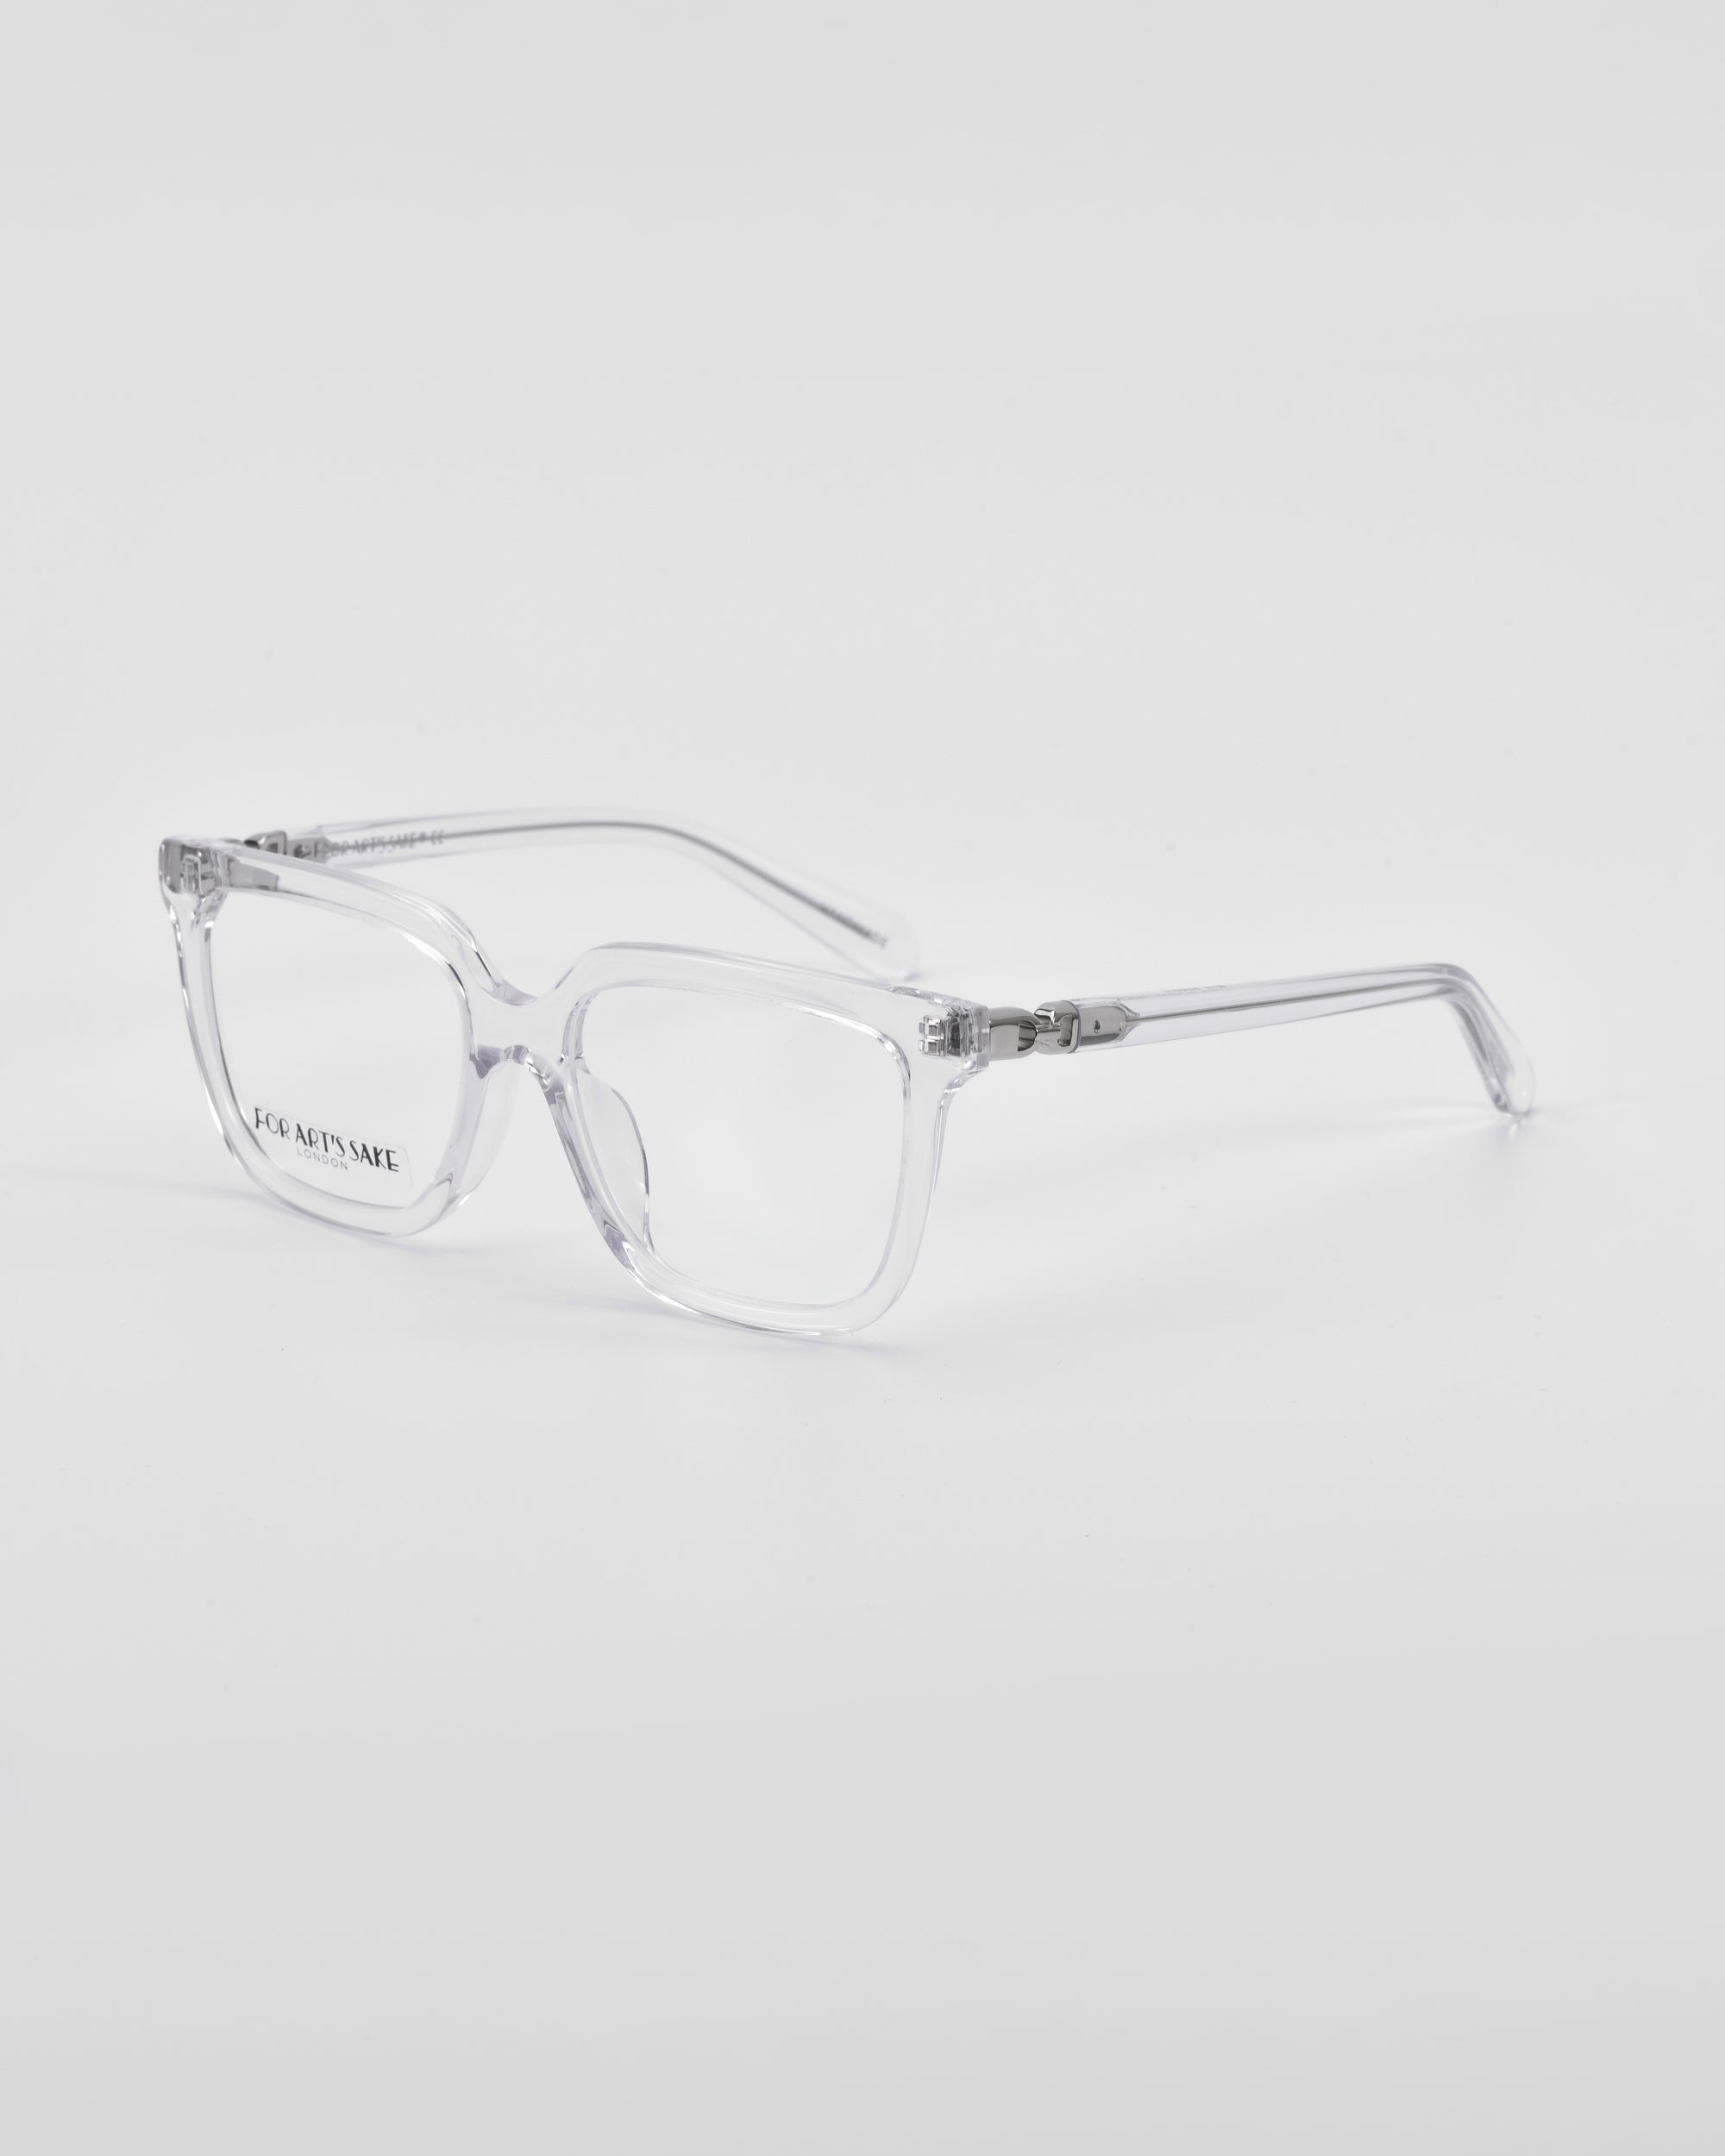 Clear, rectangular-framed eyeglasses with a classic square silhouette are displayed against a plain white background. The lenses have a slight tint, and the temples attach to the frame with small metal hinges. These stylish Nina frames by For Art's Sake® can be customized through our prescription service to meet your vision needs.